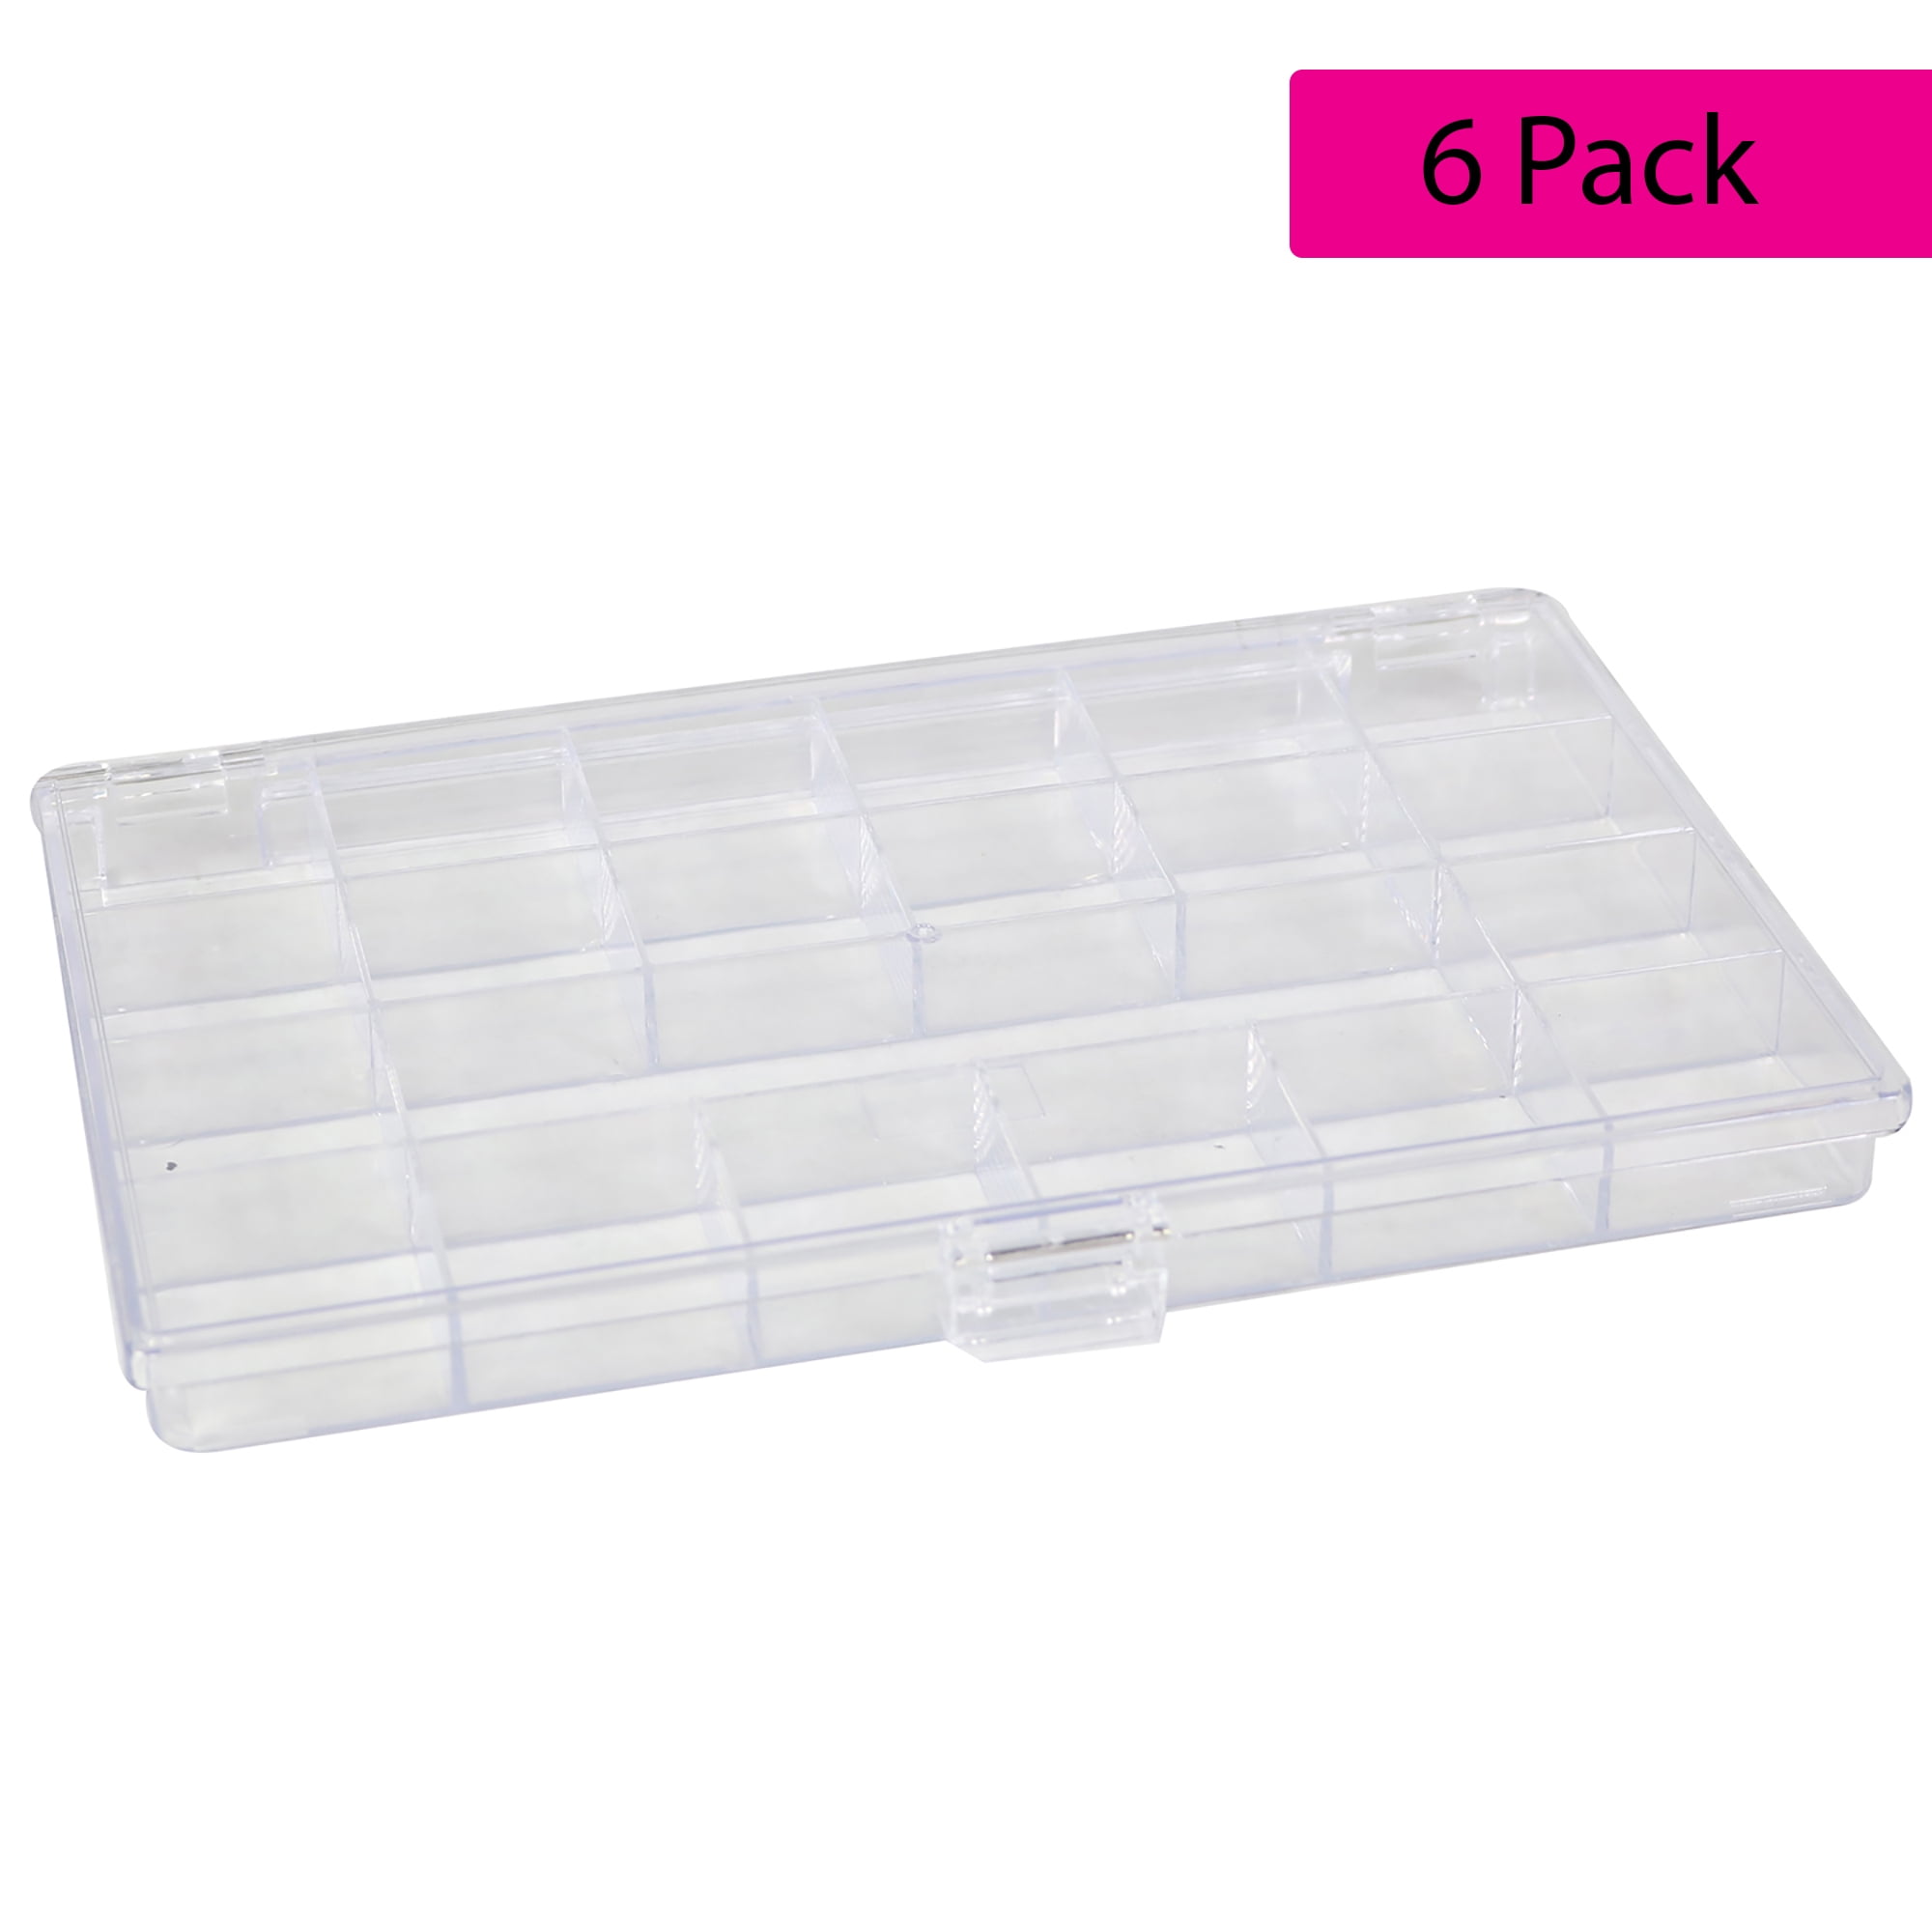 Flambeau 26892ae Two Tray 2 Pack TWO TRAY CRAFT BOX 